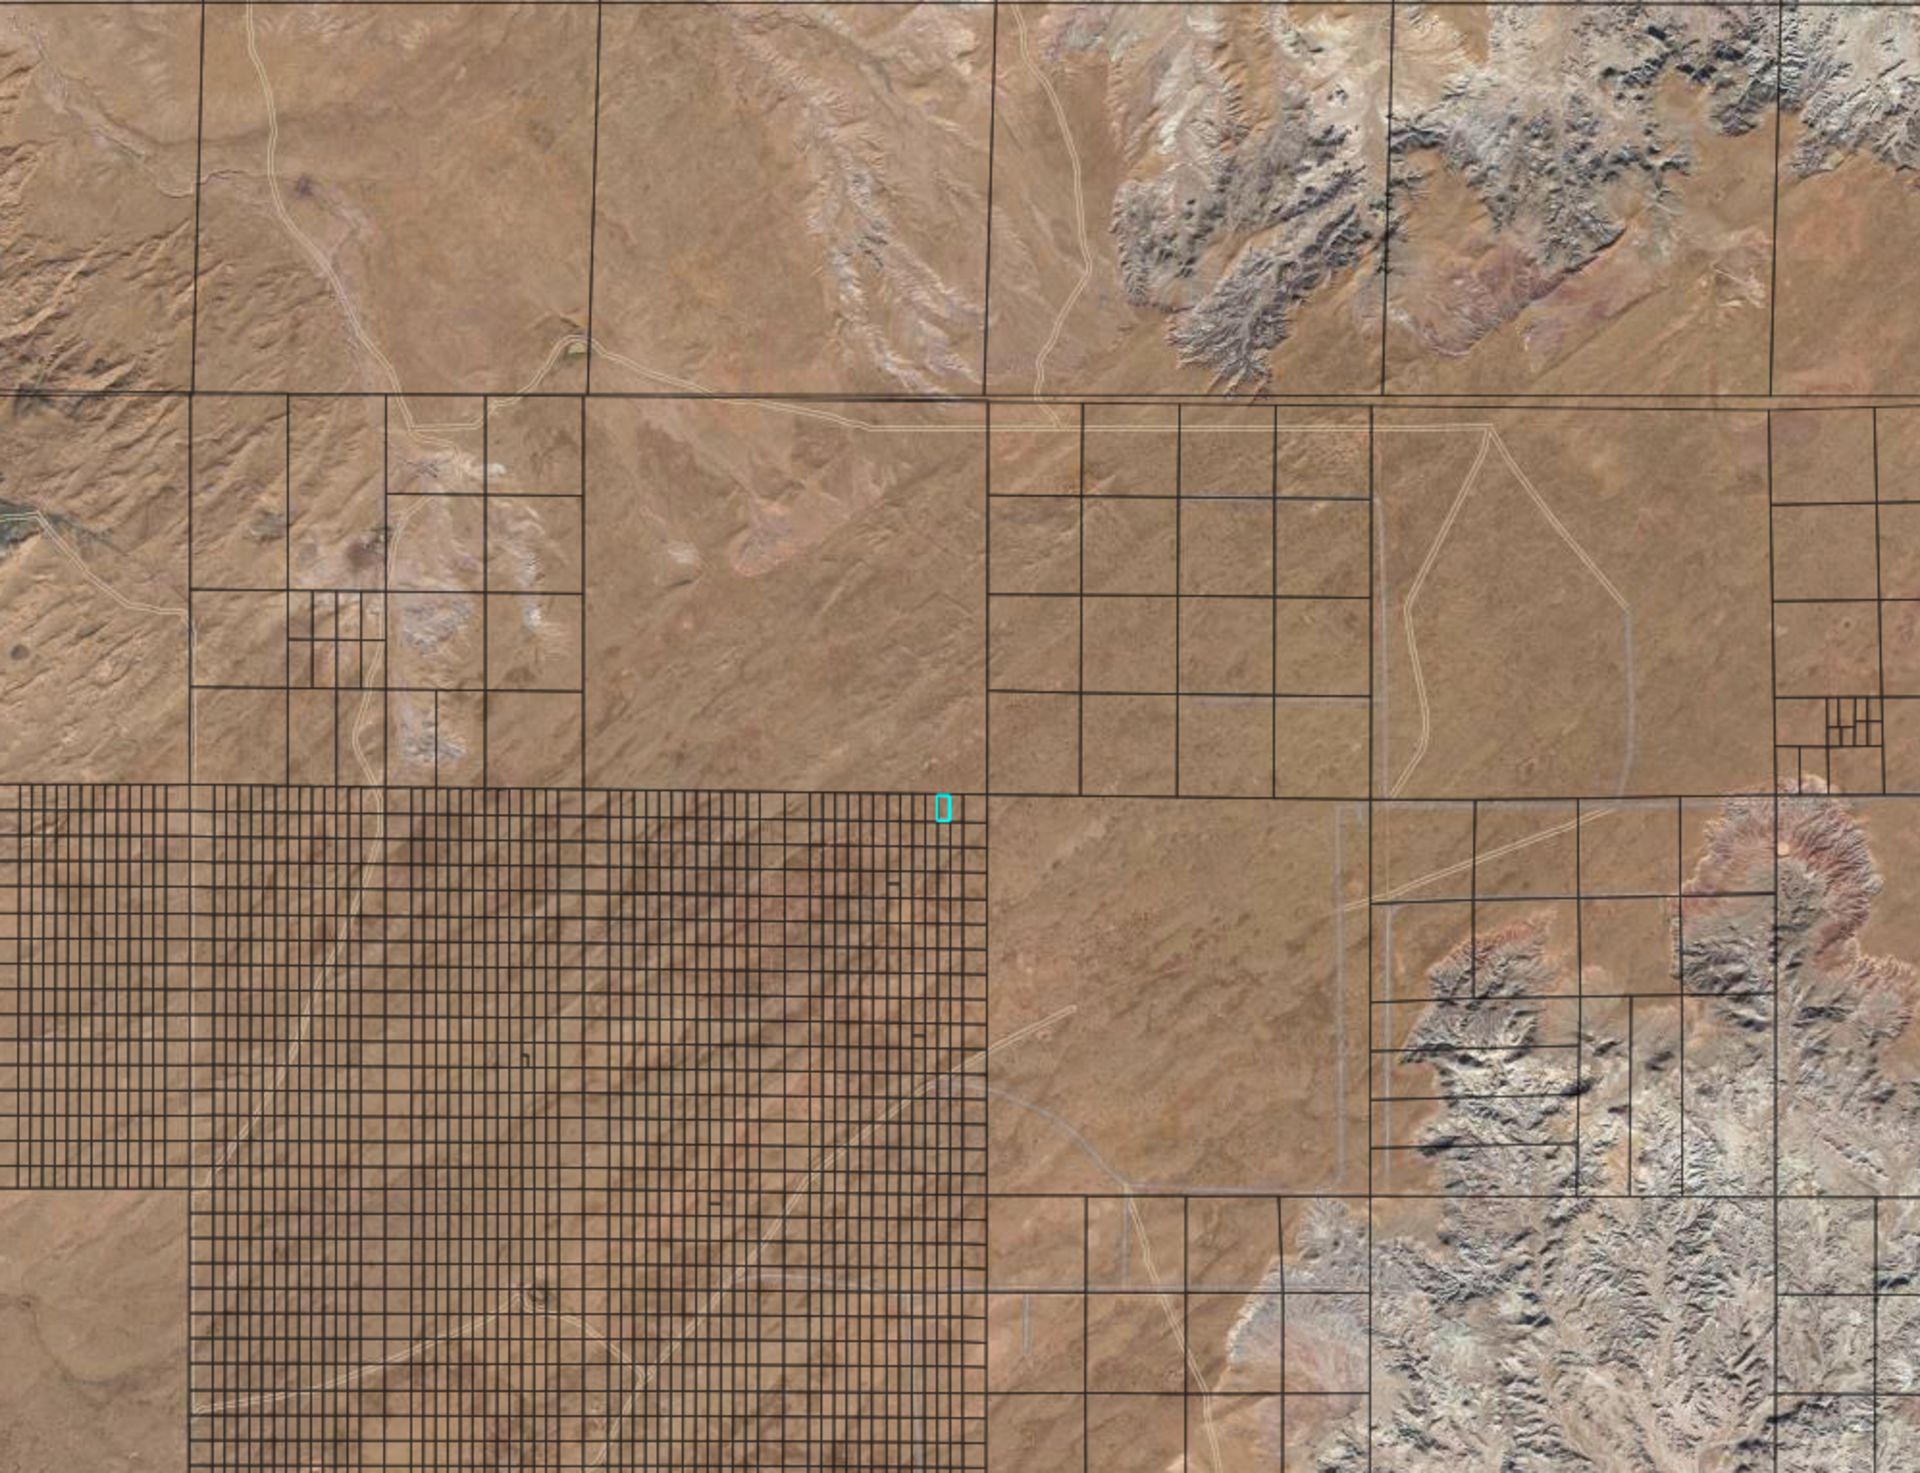 1.26 Acre Parcel in Historic and Stunning Navajo County, Arizona! - Image 8 of 13